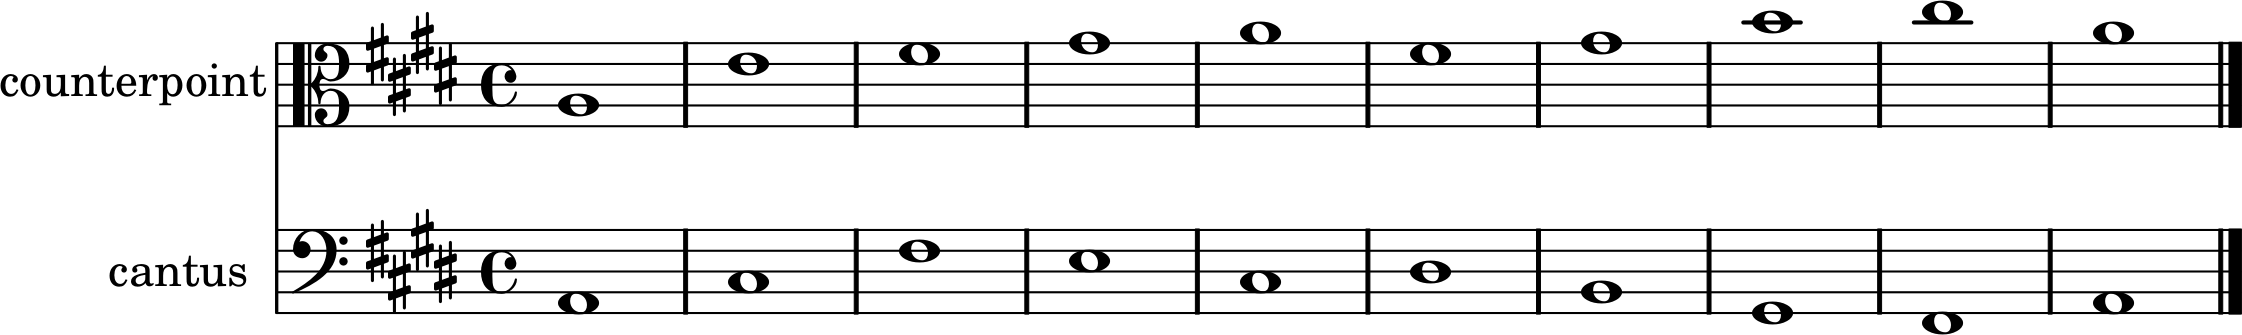 A second counterpoint in the alto to the given cantus